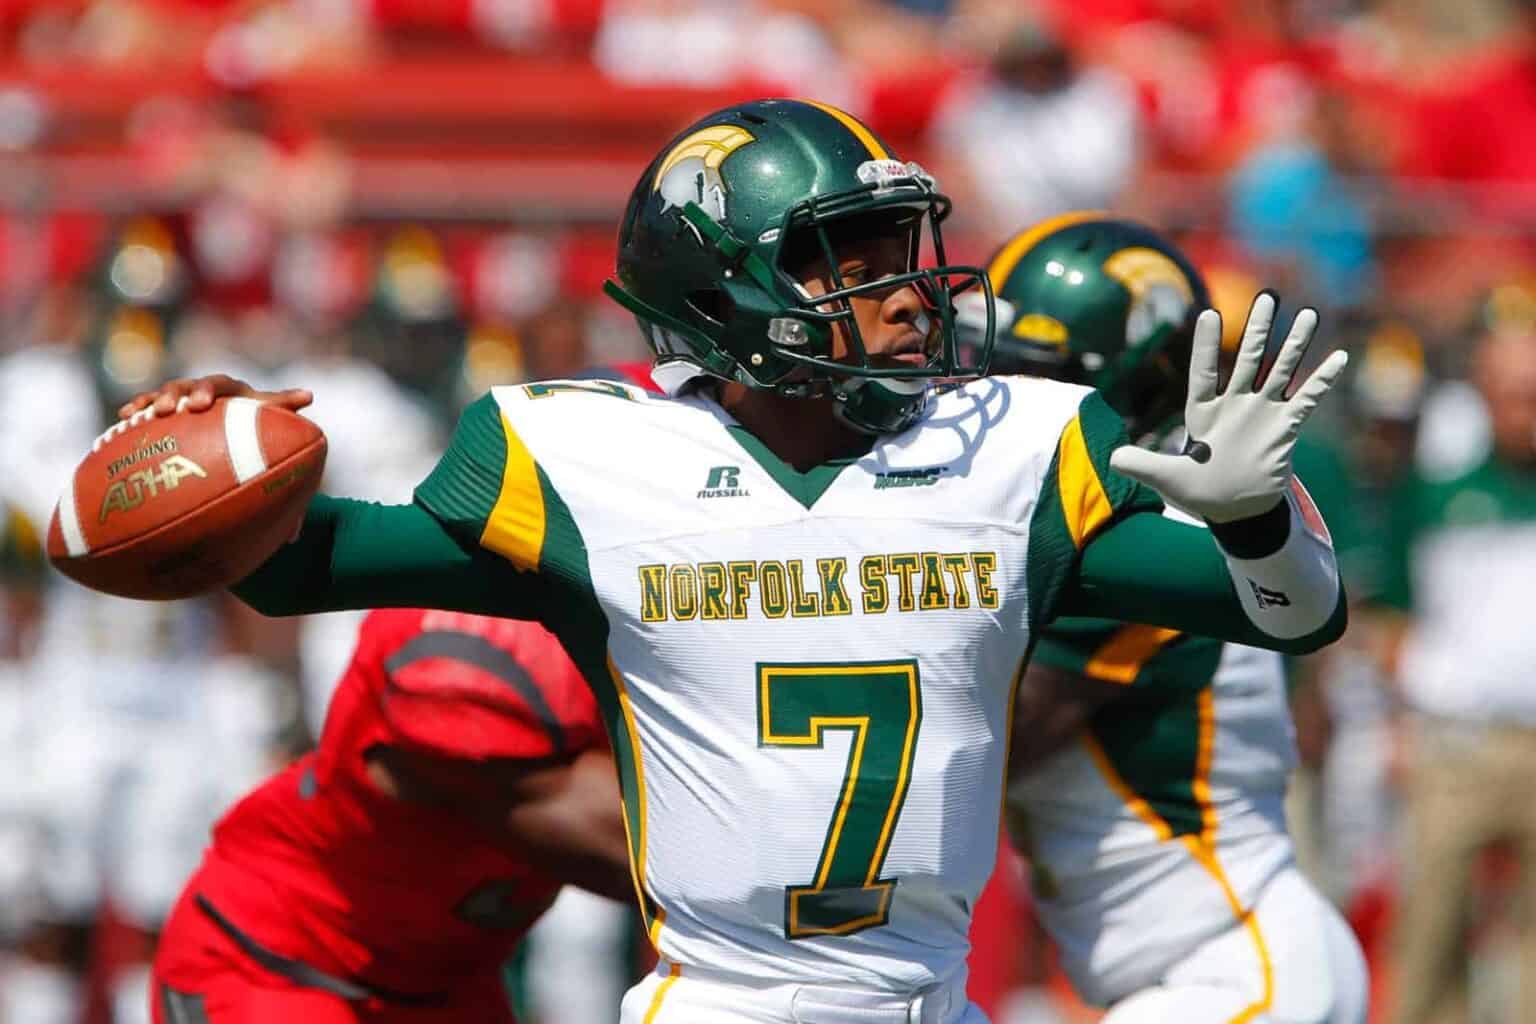 Norfolk State, Towson schedule 202324 homeandhome football series